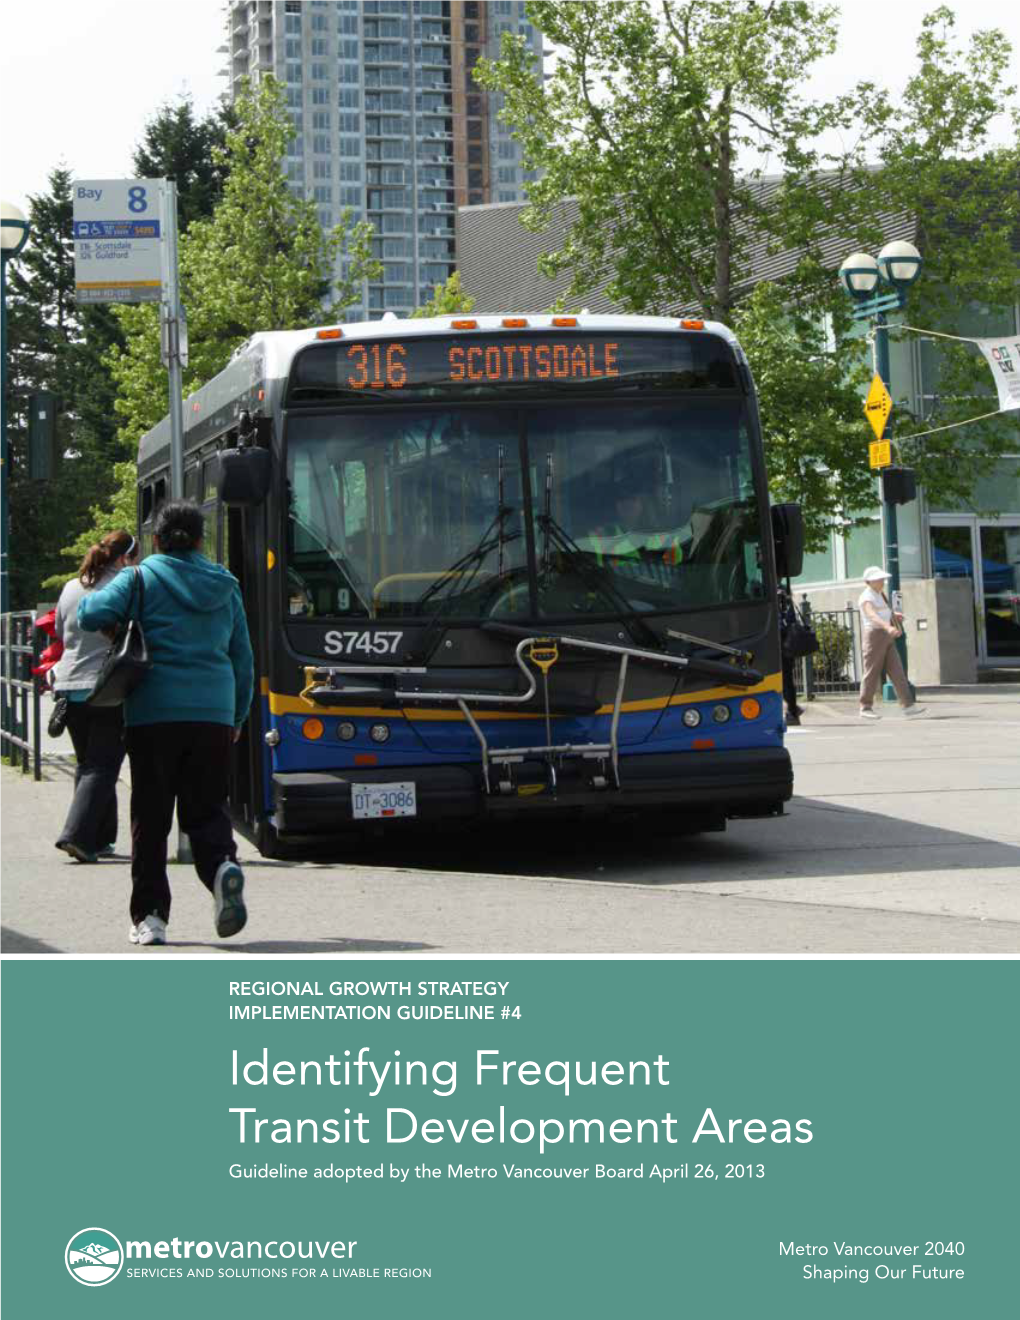 Identifying Frequent Transit Development Areas Guideline Adopted by the Metro Vancouver Board April 26, 2013